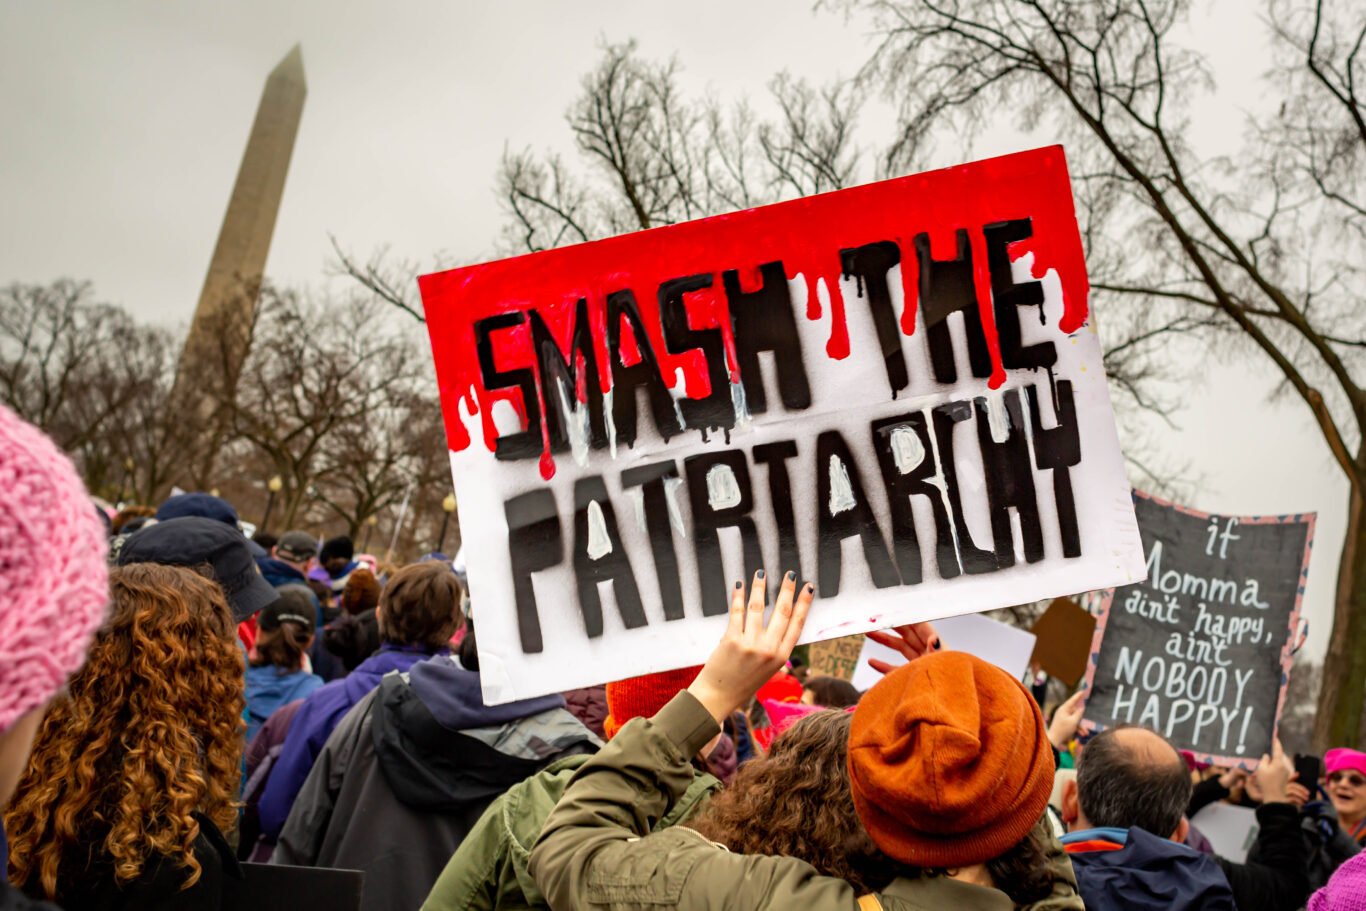 A woman holding bloody "Smash the patriarchy" sign on a protest.